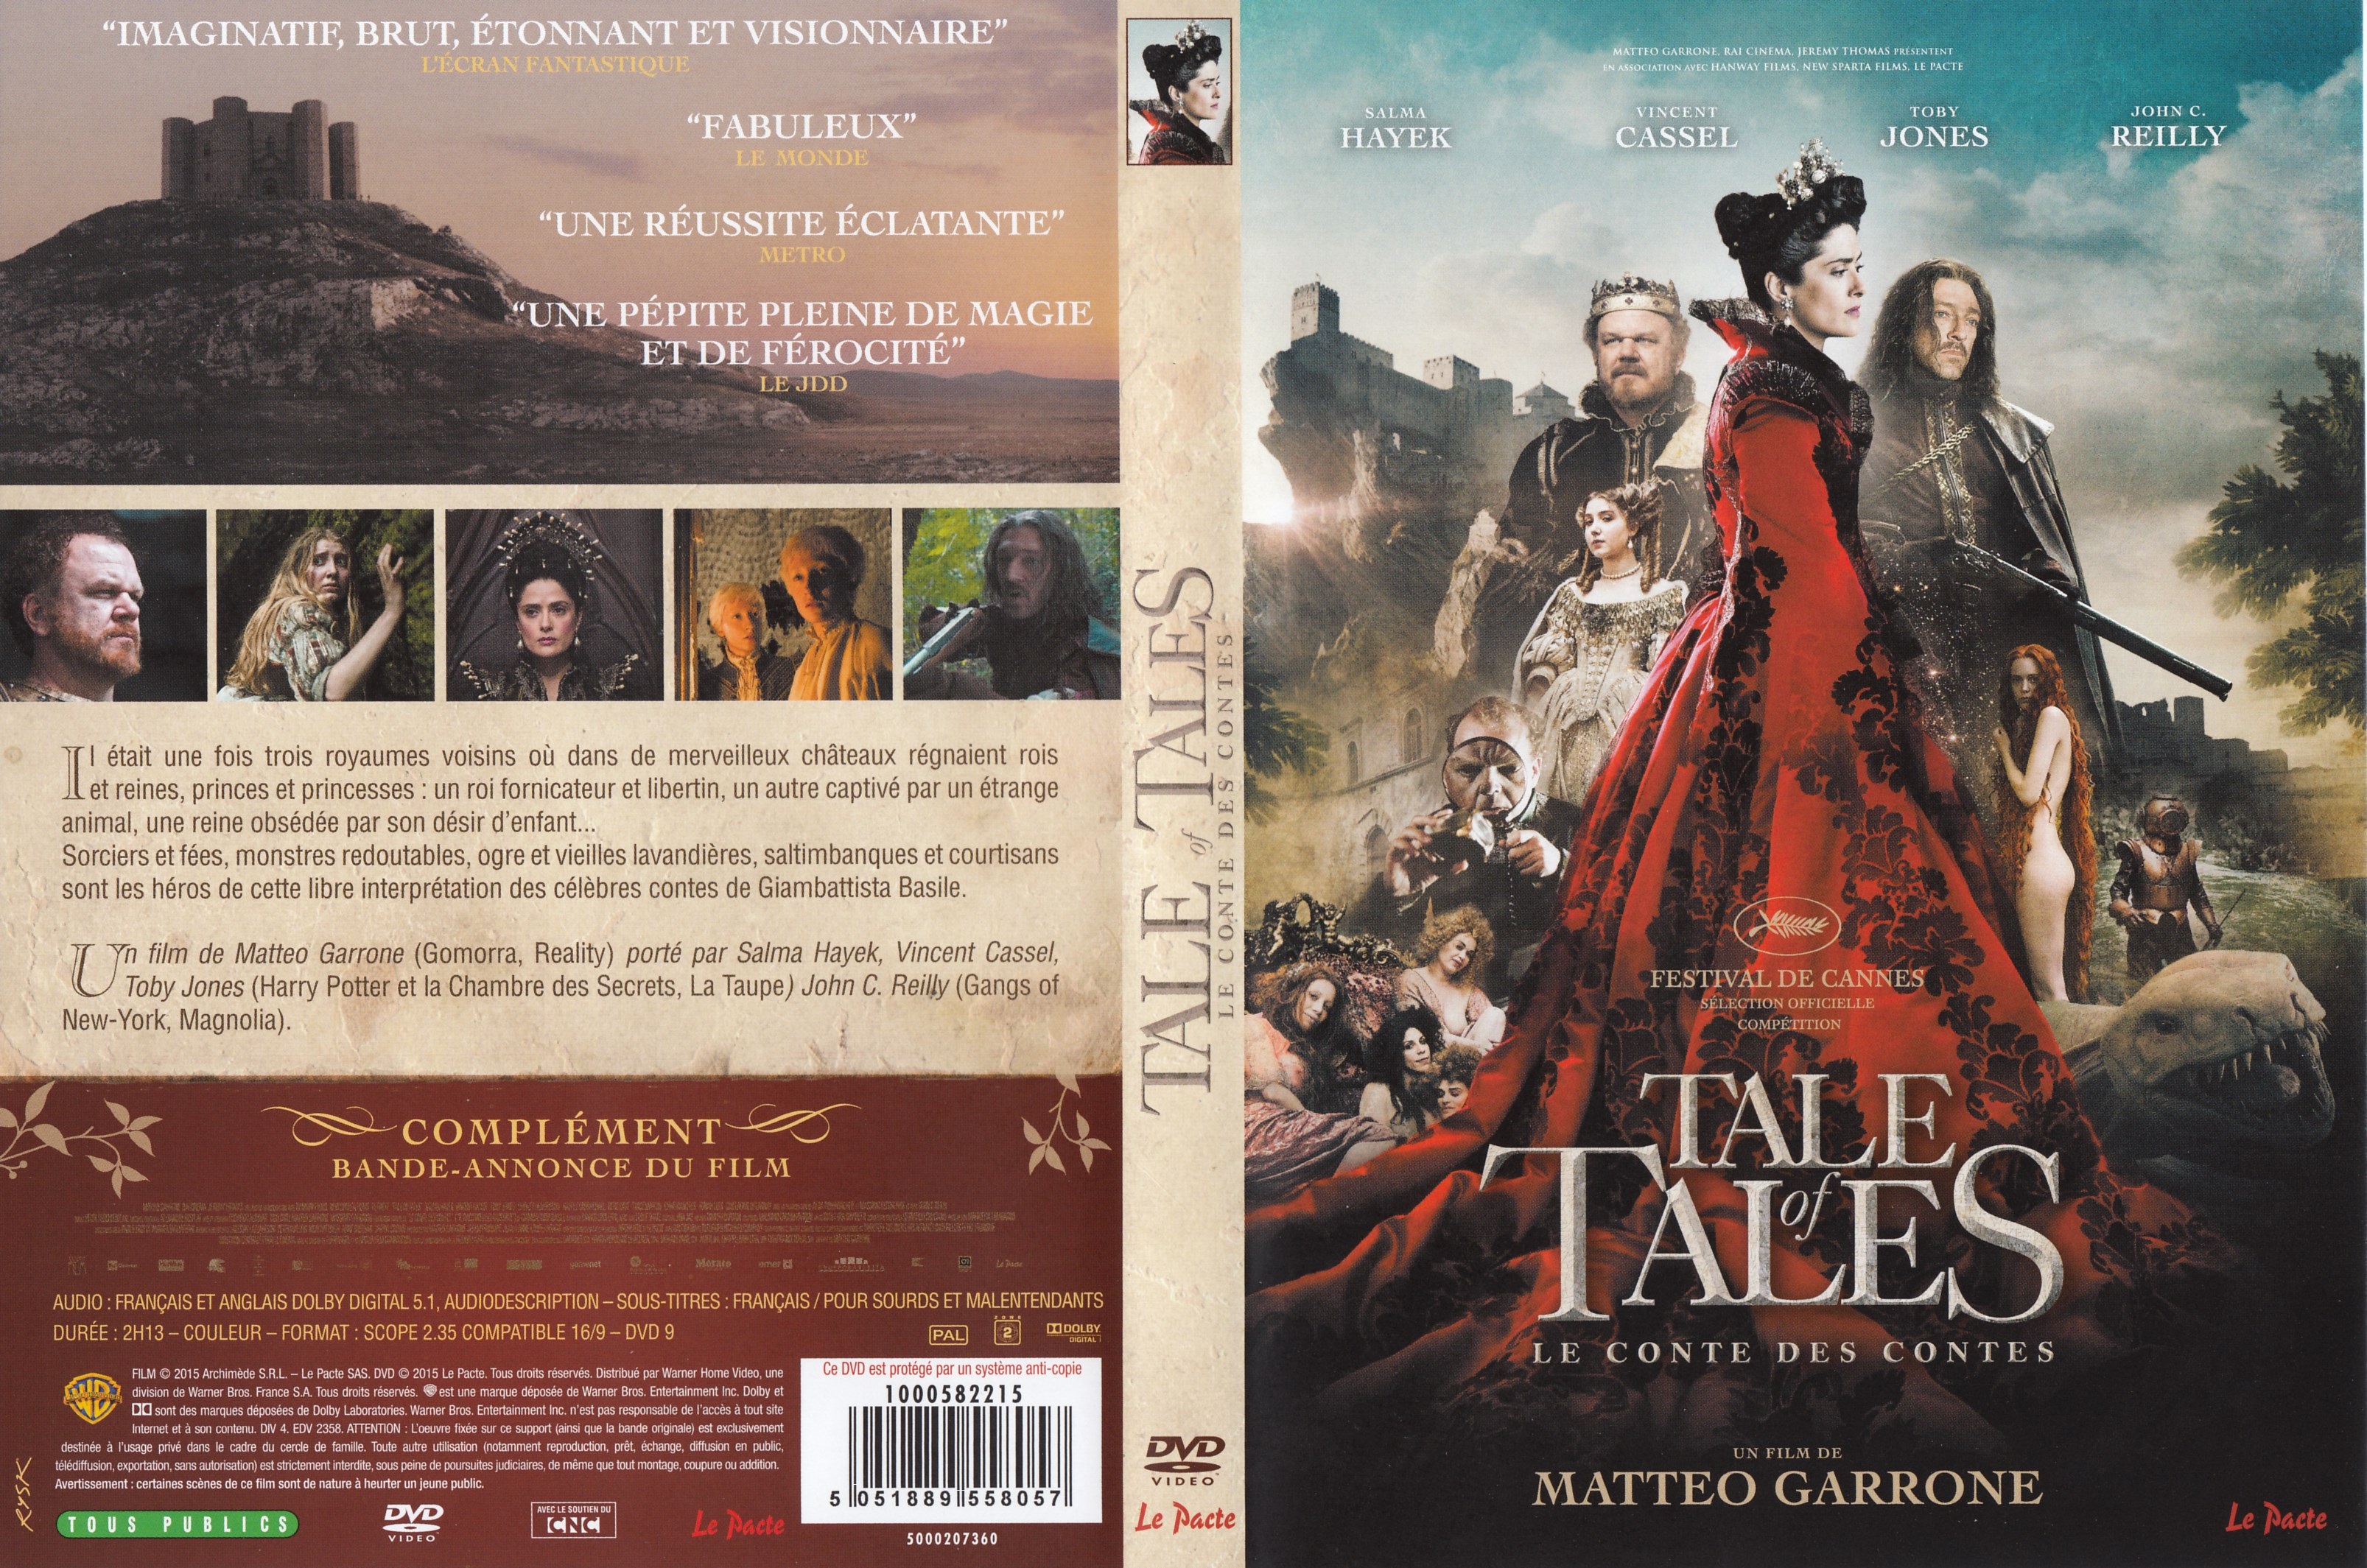 Jaquette DVD Tale of Tales